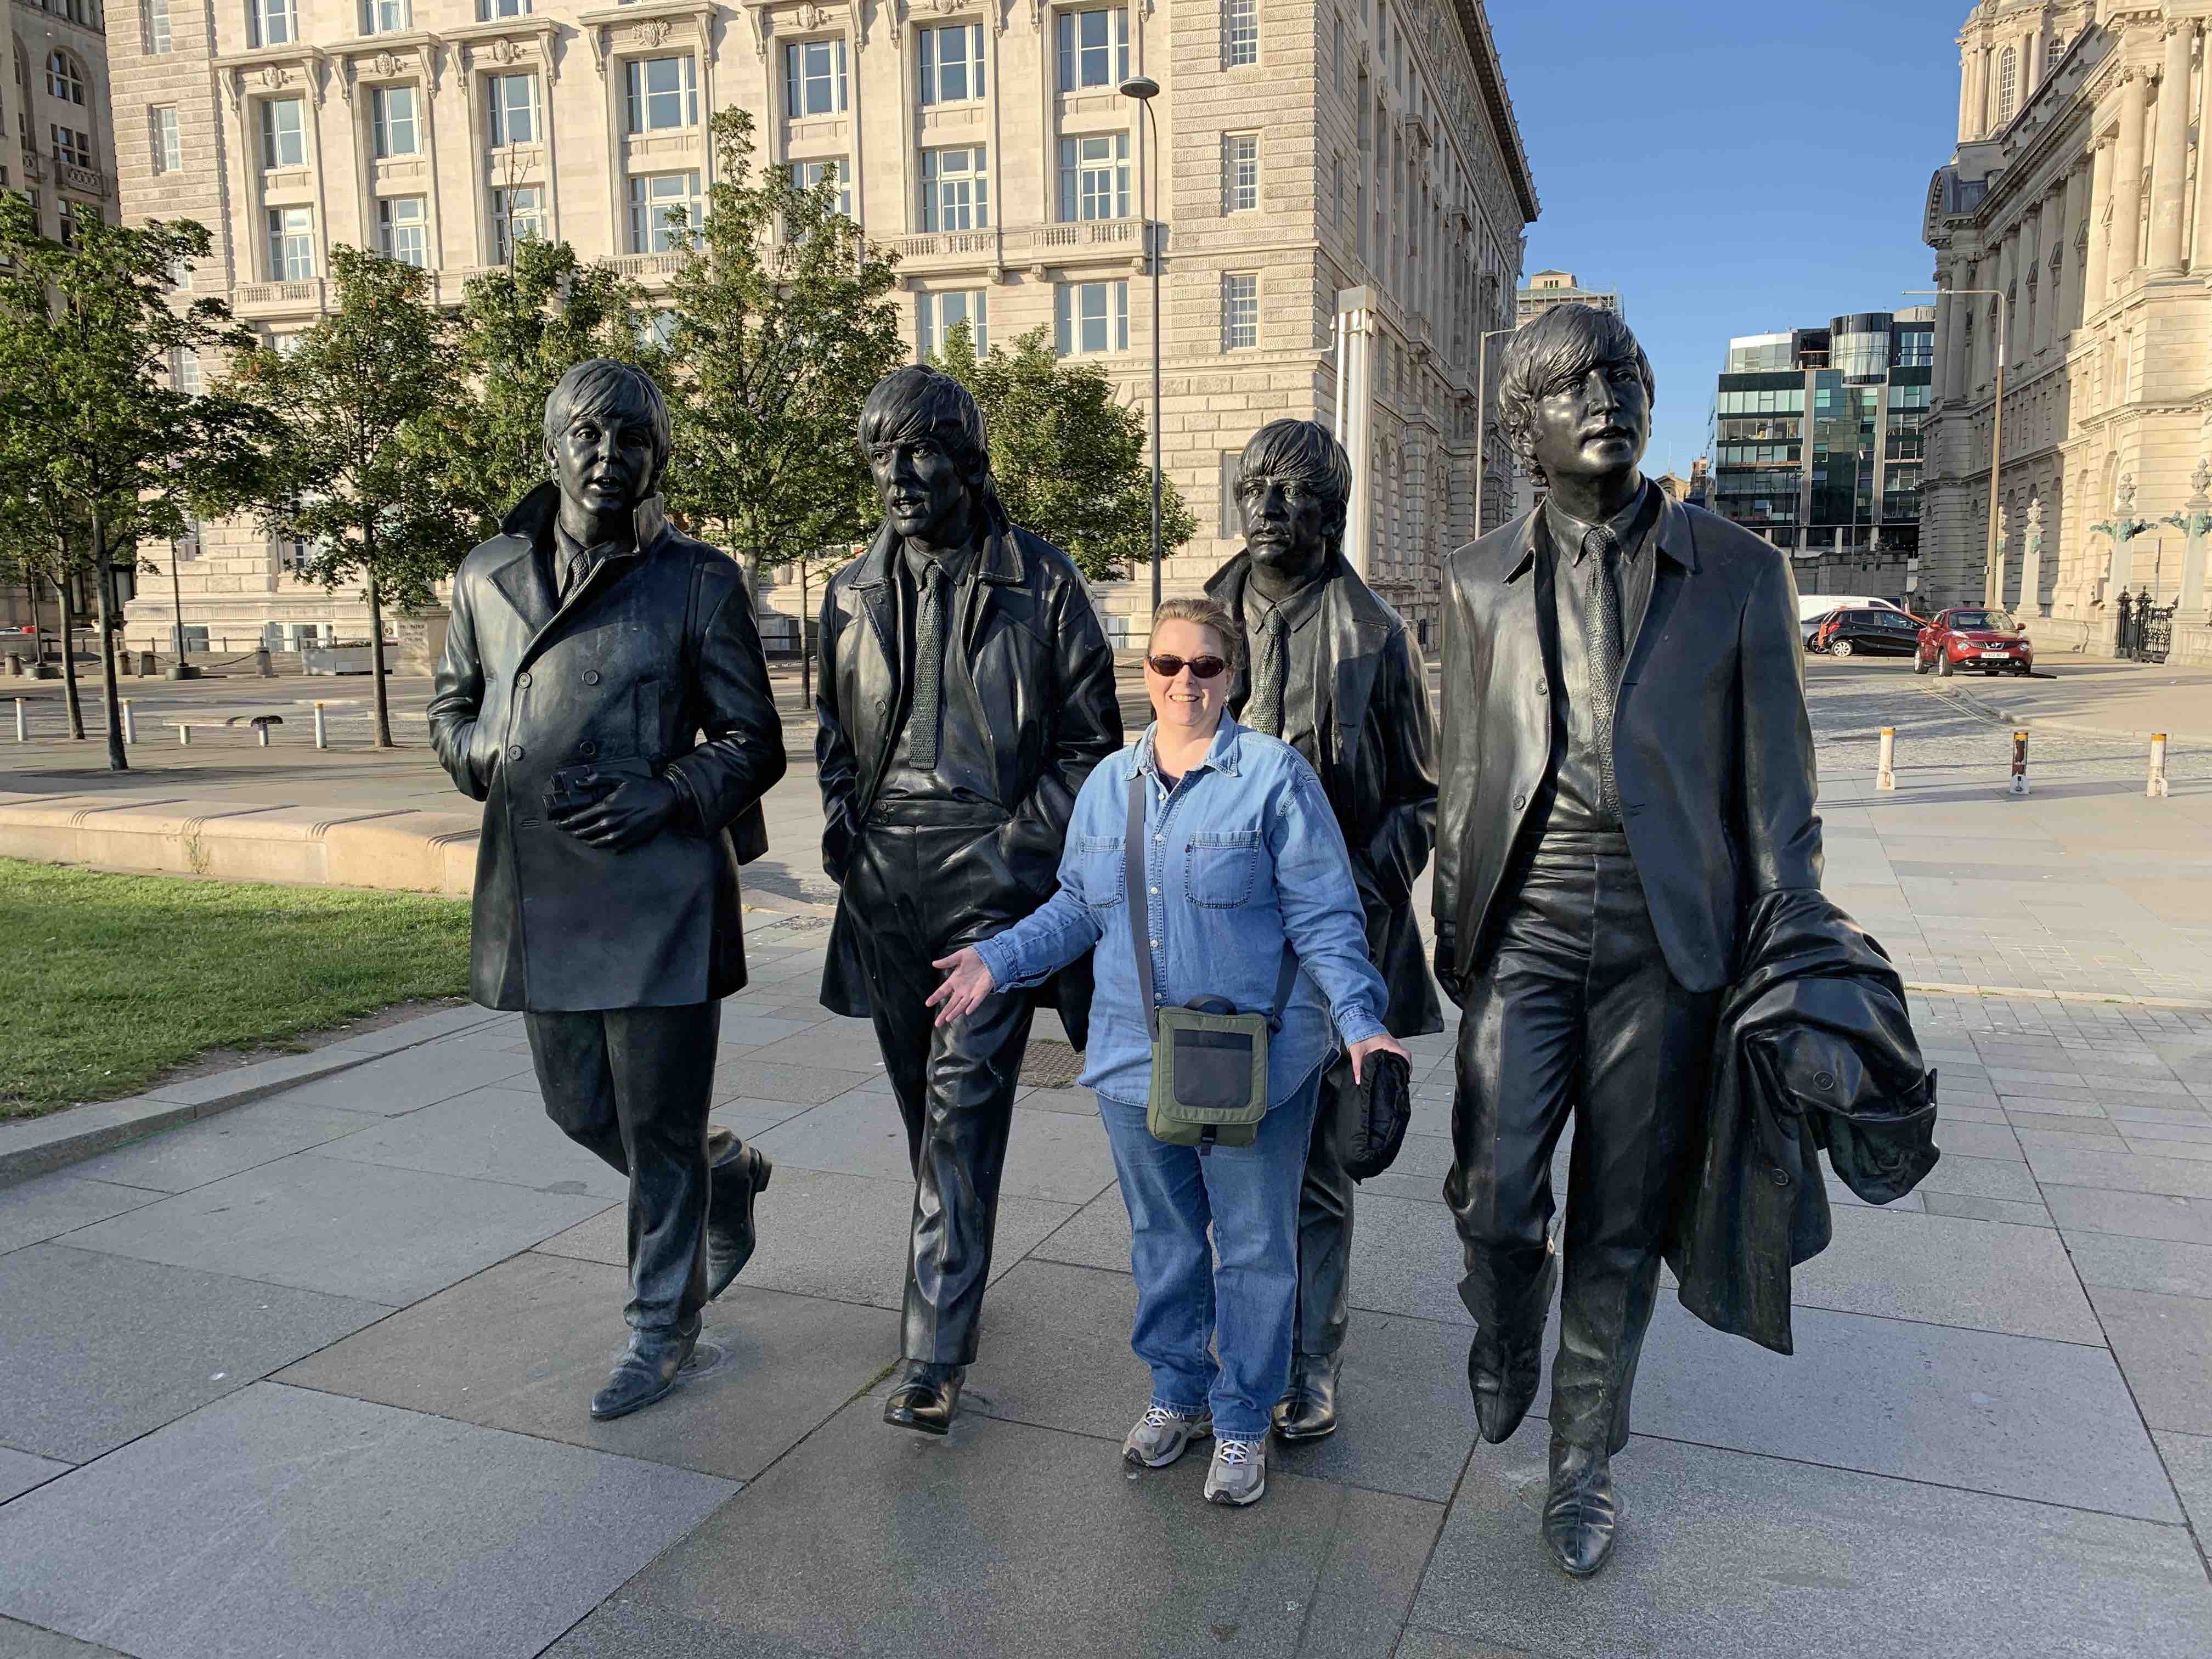 The author standing among the Beatles bronze sculptures, Liverpool